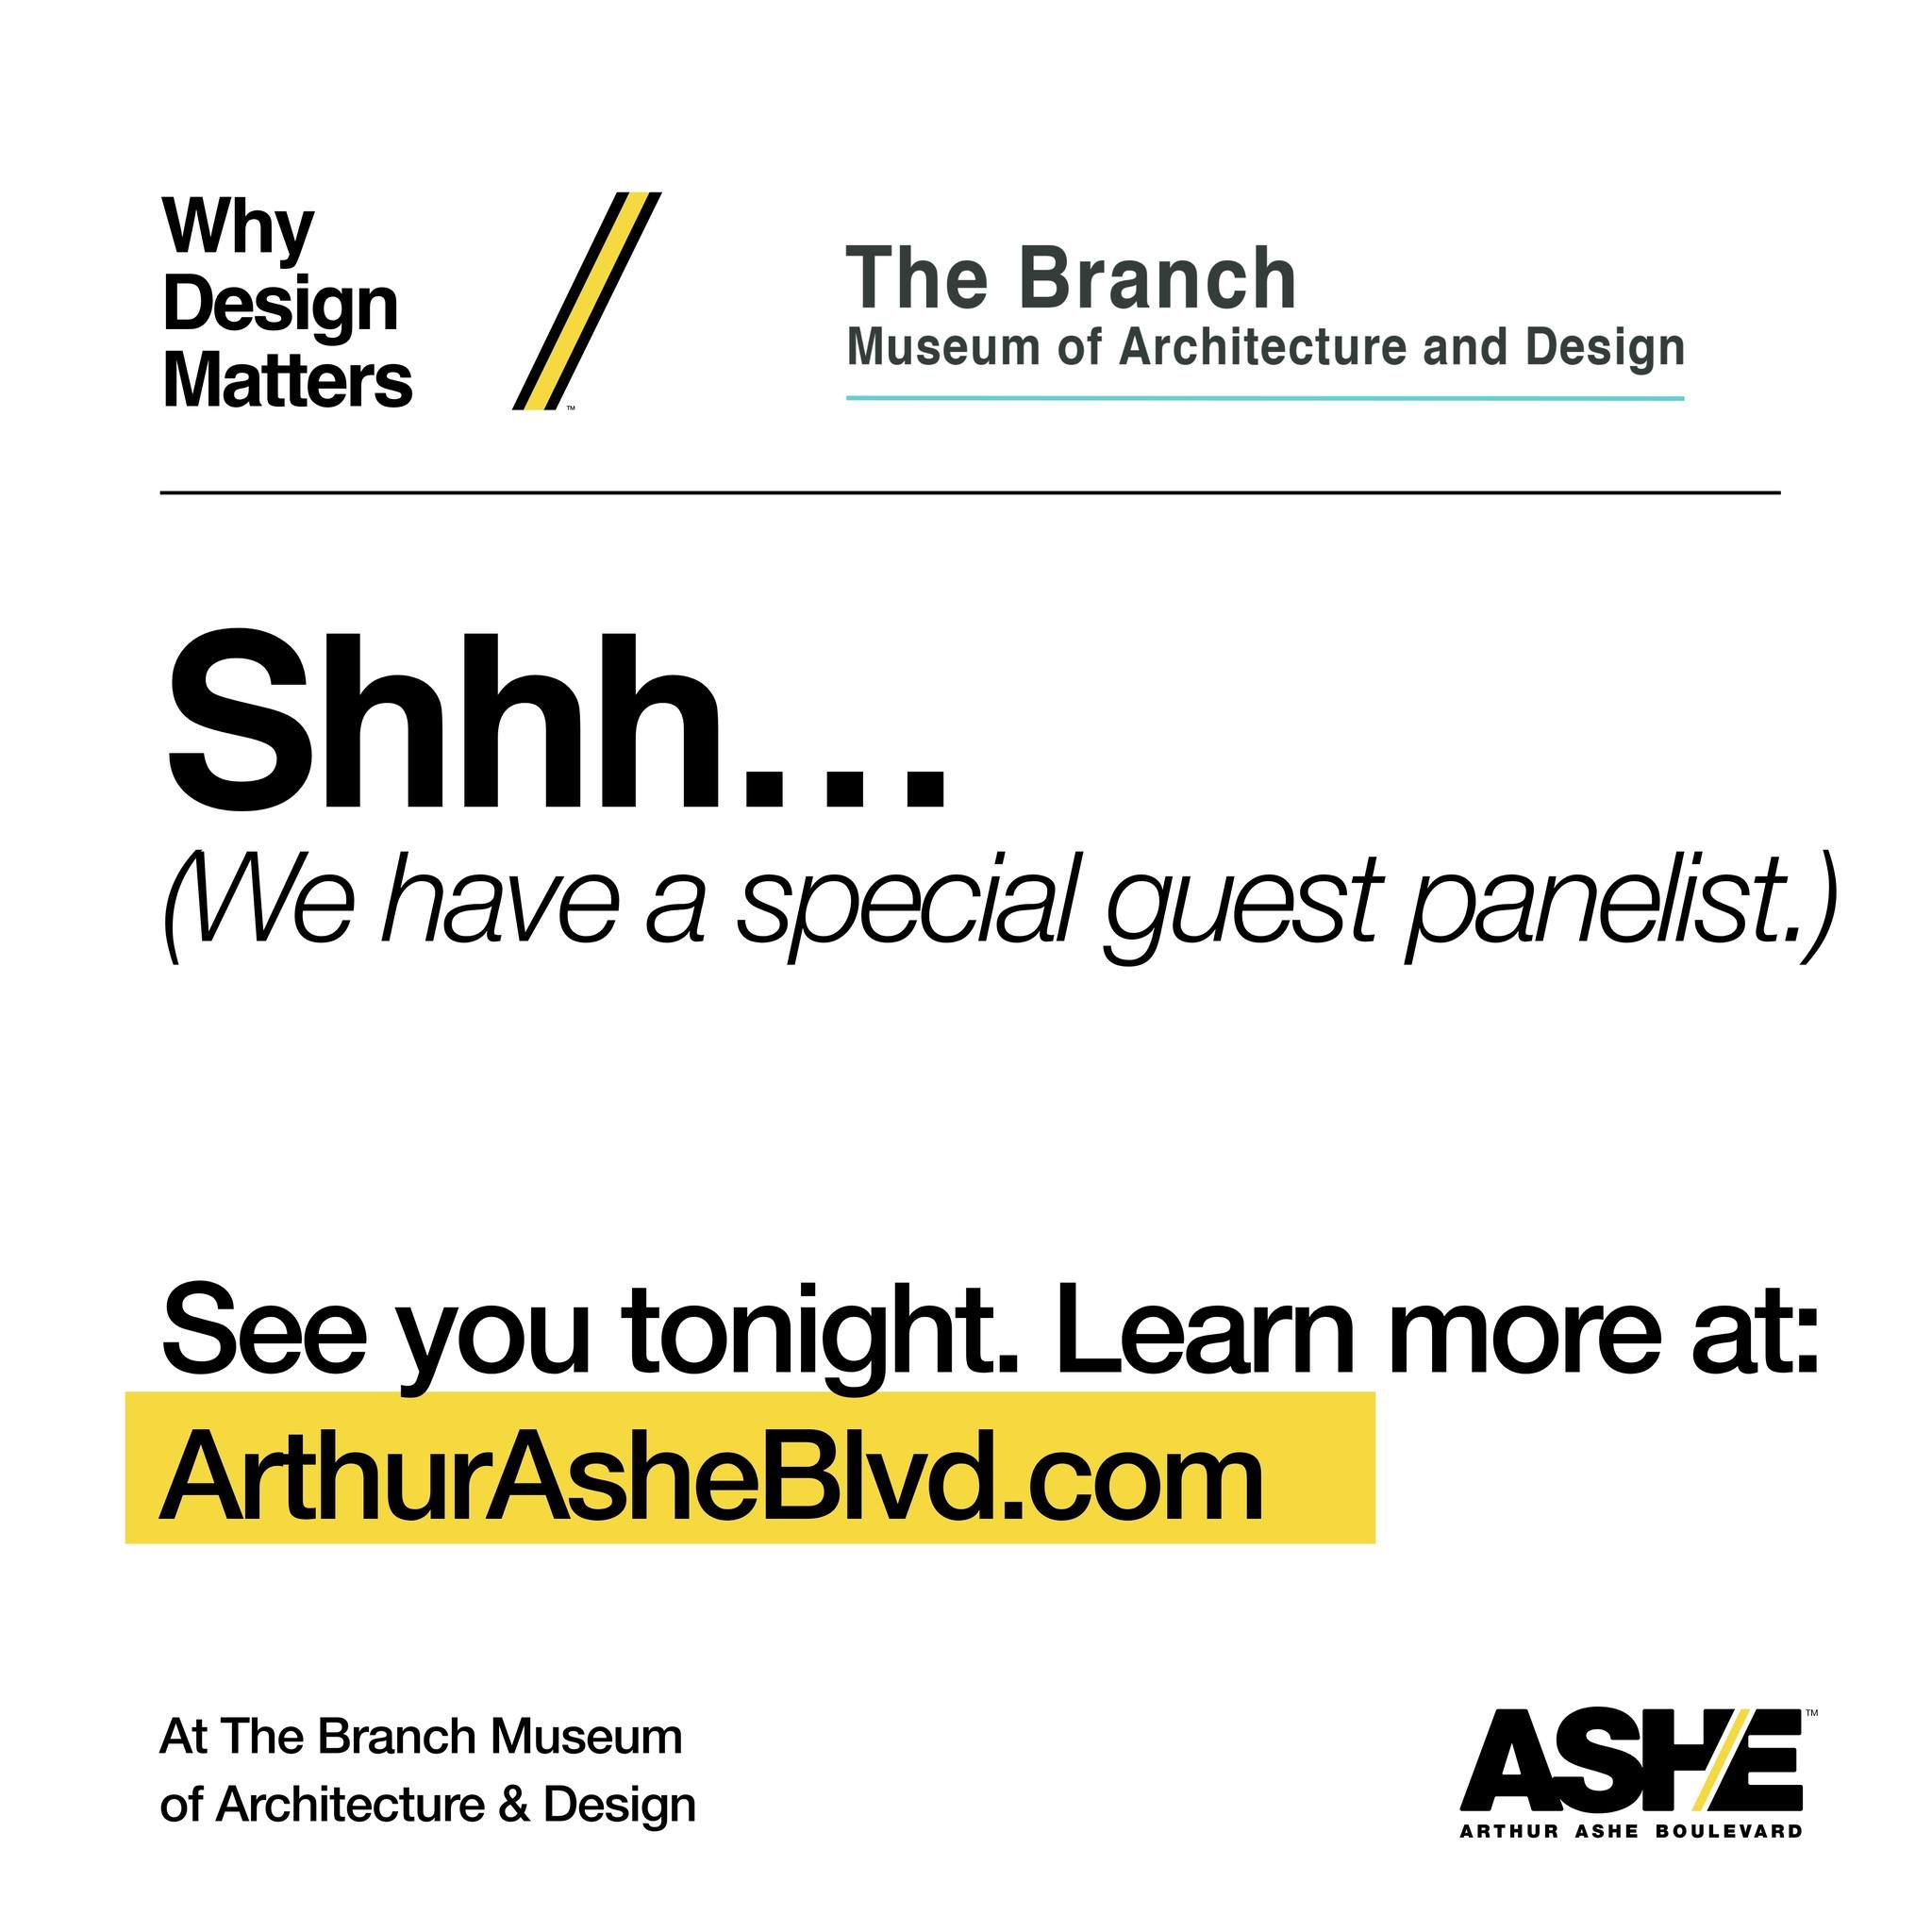 Tonight is the night! Come to The Branch Museum of Architecture and Design and join the conversation. Get your free tickets here: https://support.branchmuseum.org/event/aablvd-chapters-i-and-ii/e574054. 

For more info, visit: arthurasheblvd.com 

#a